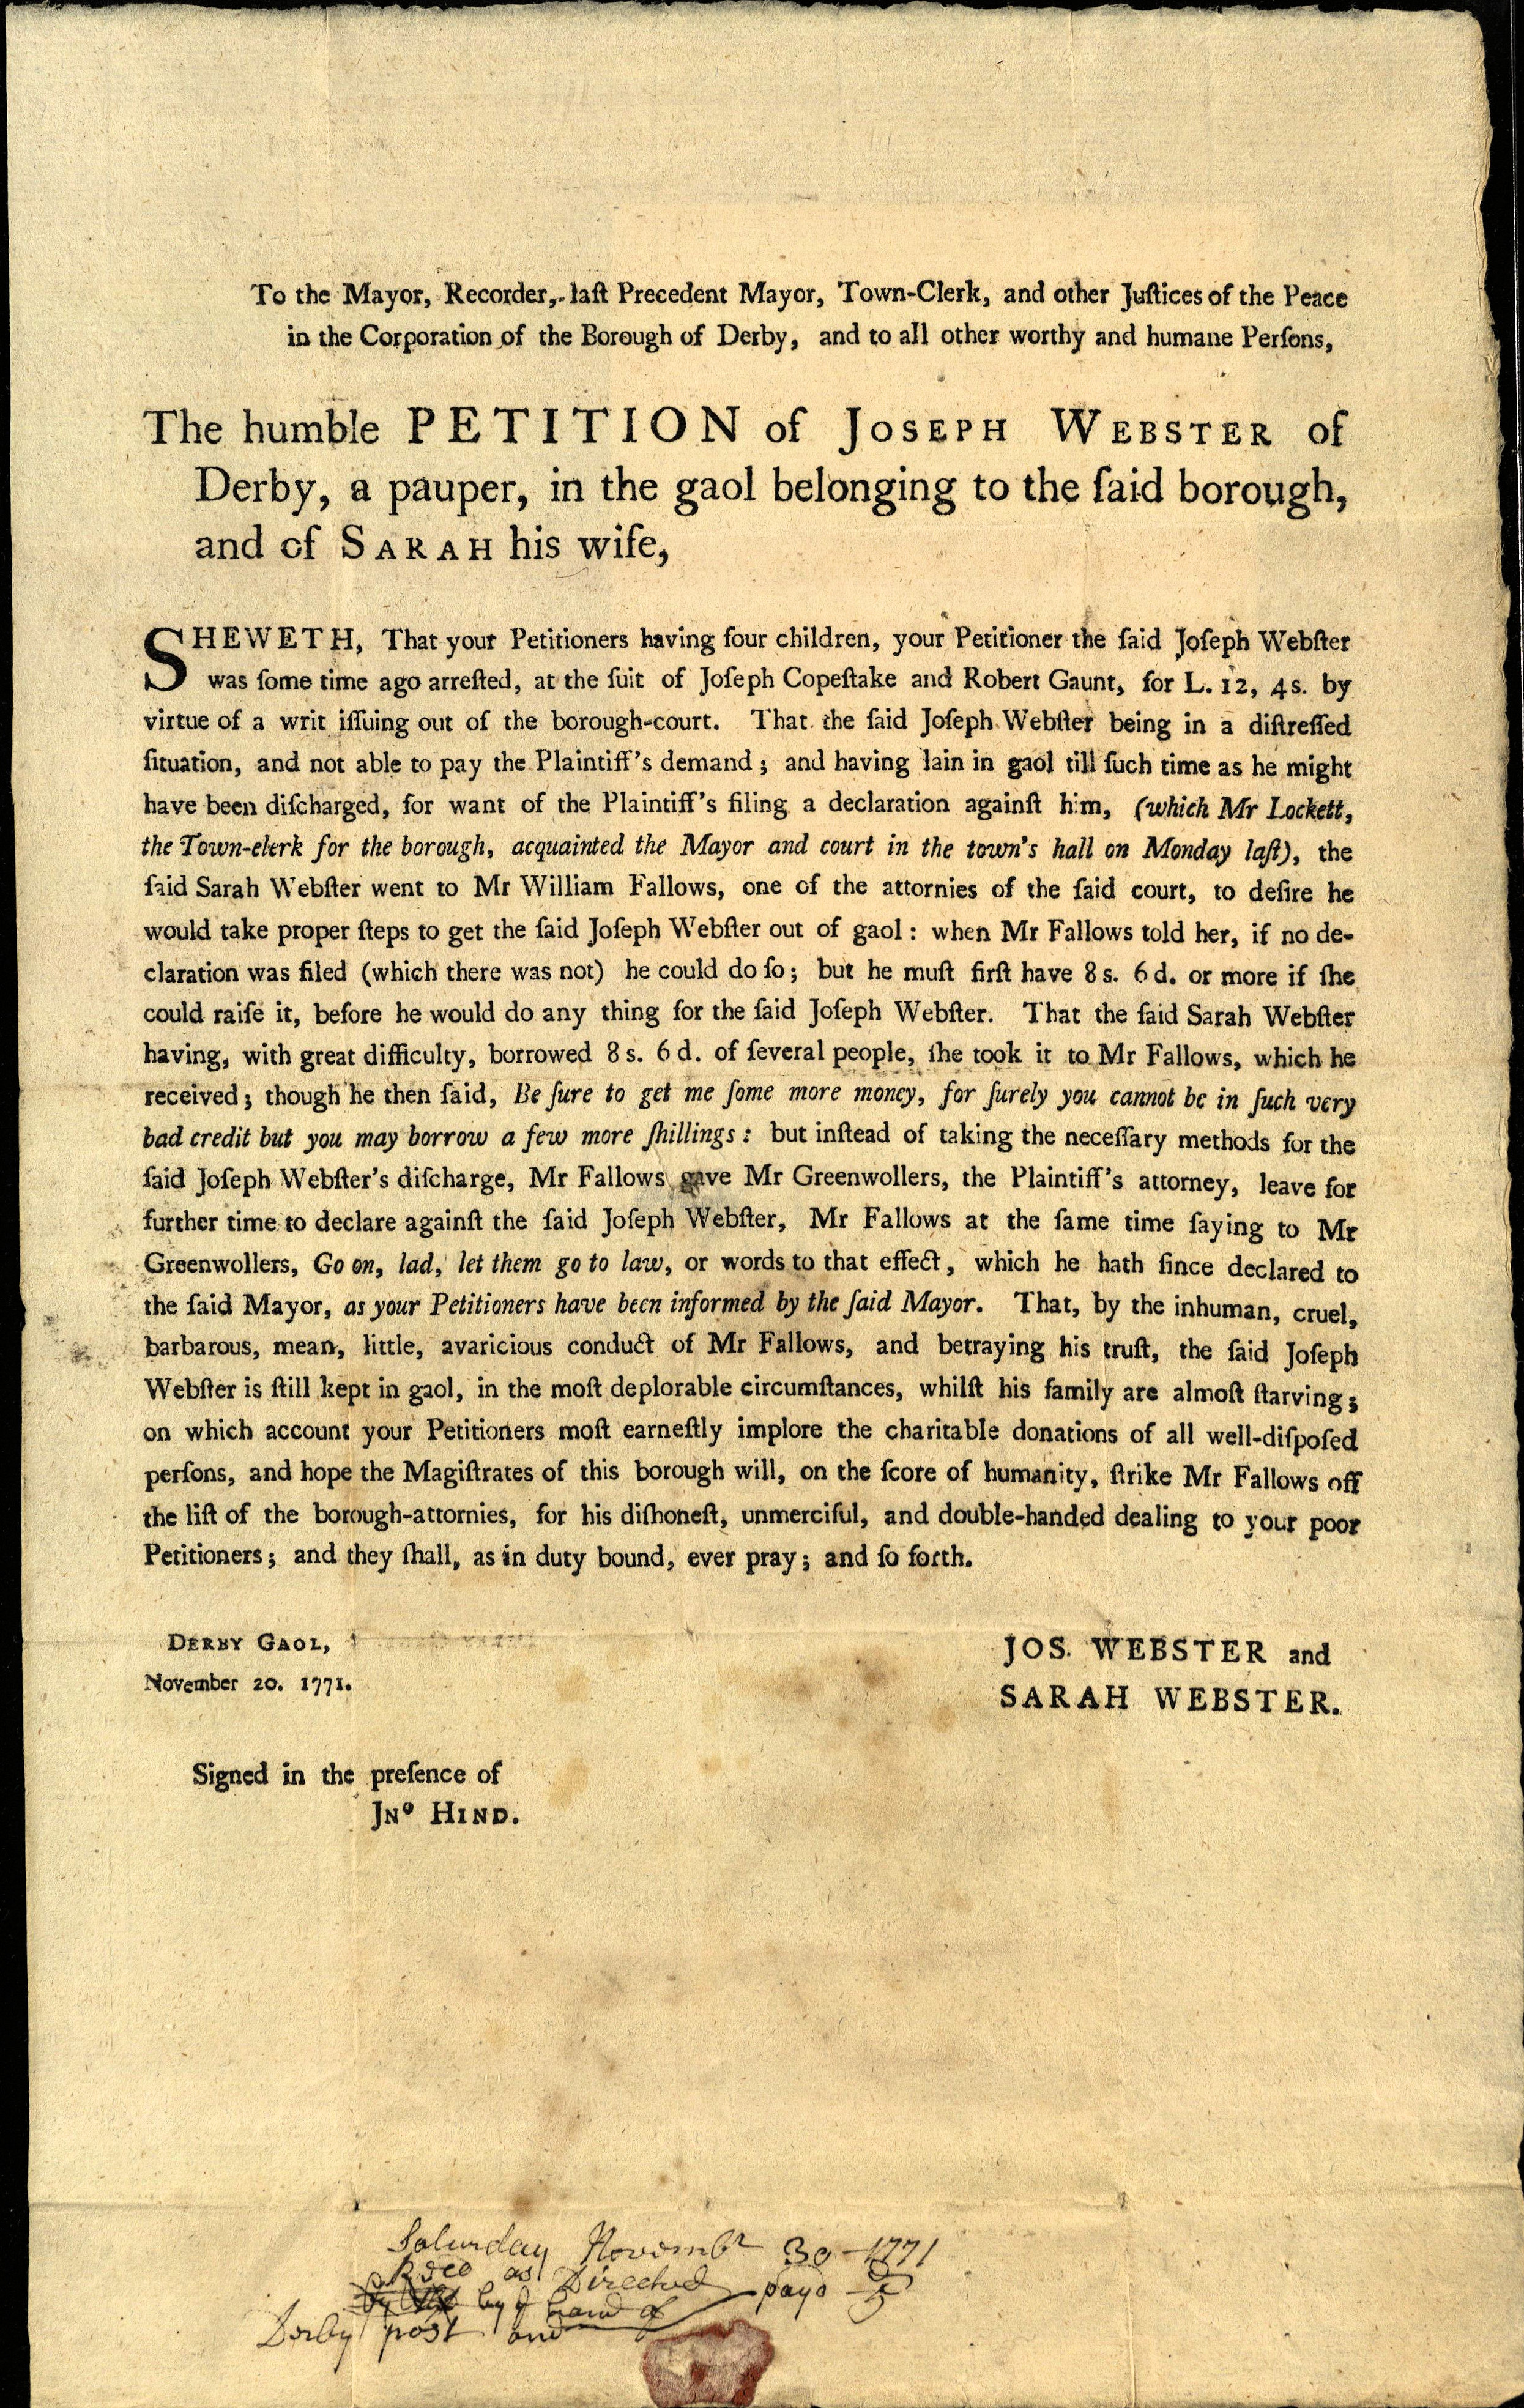 The humble petition of Joseph Webster, 1771